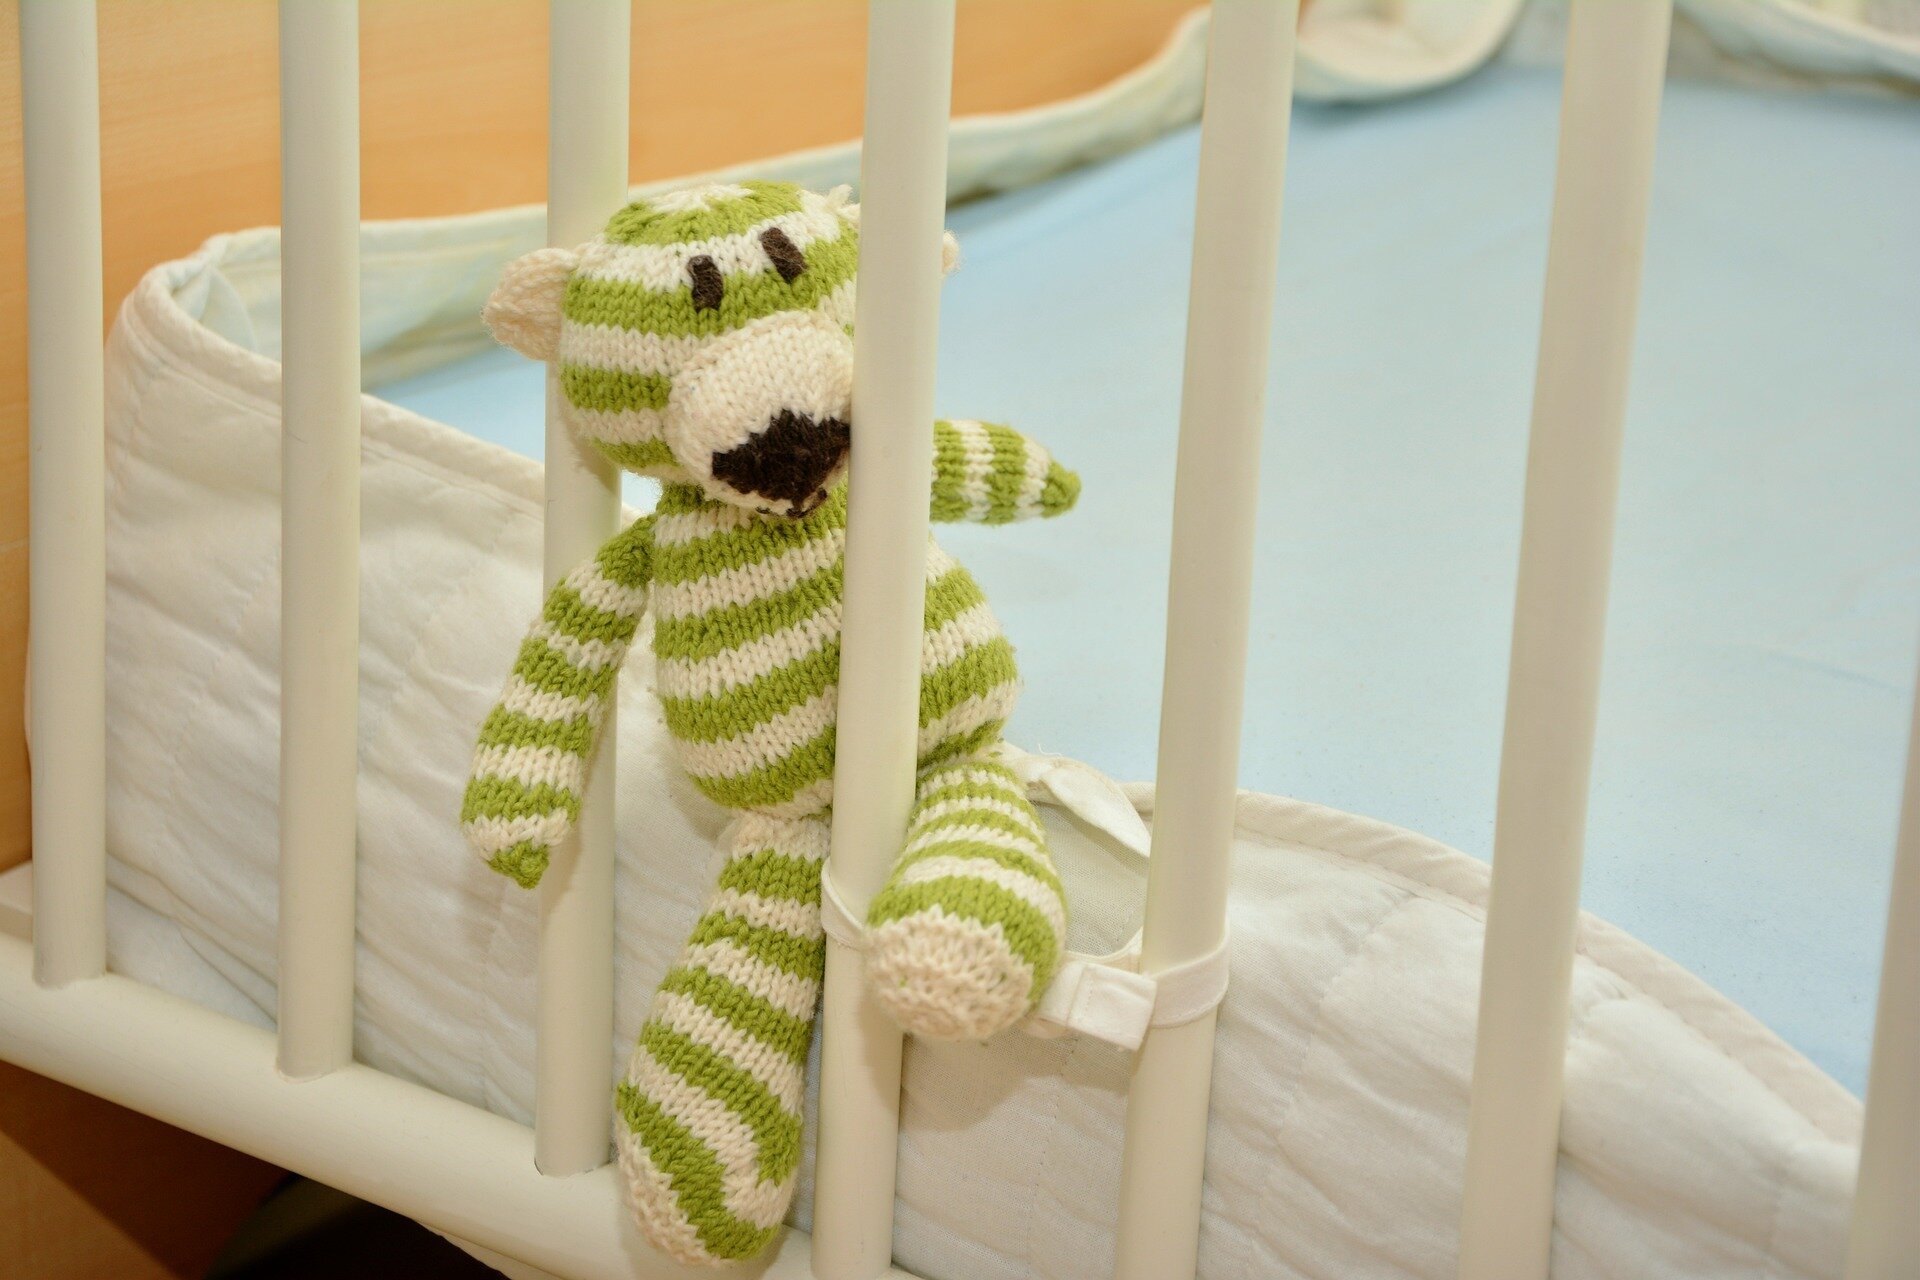 Sudden infant death syndrome may have biologic cause